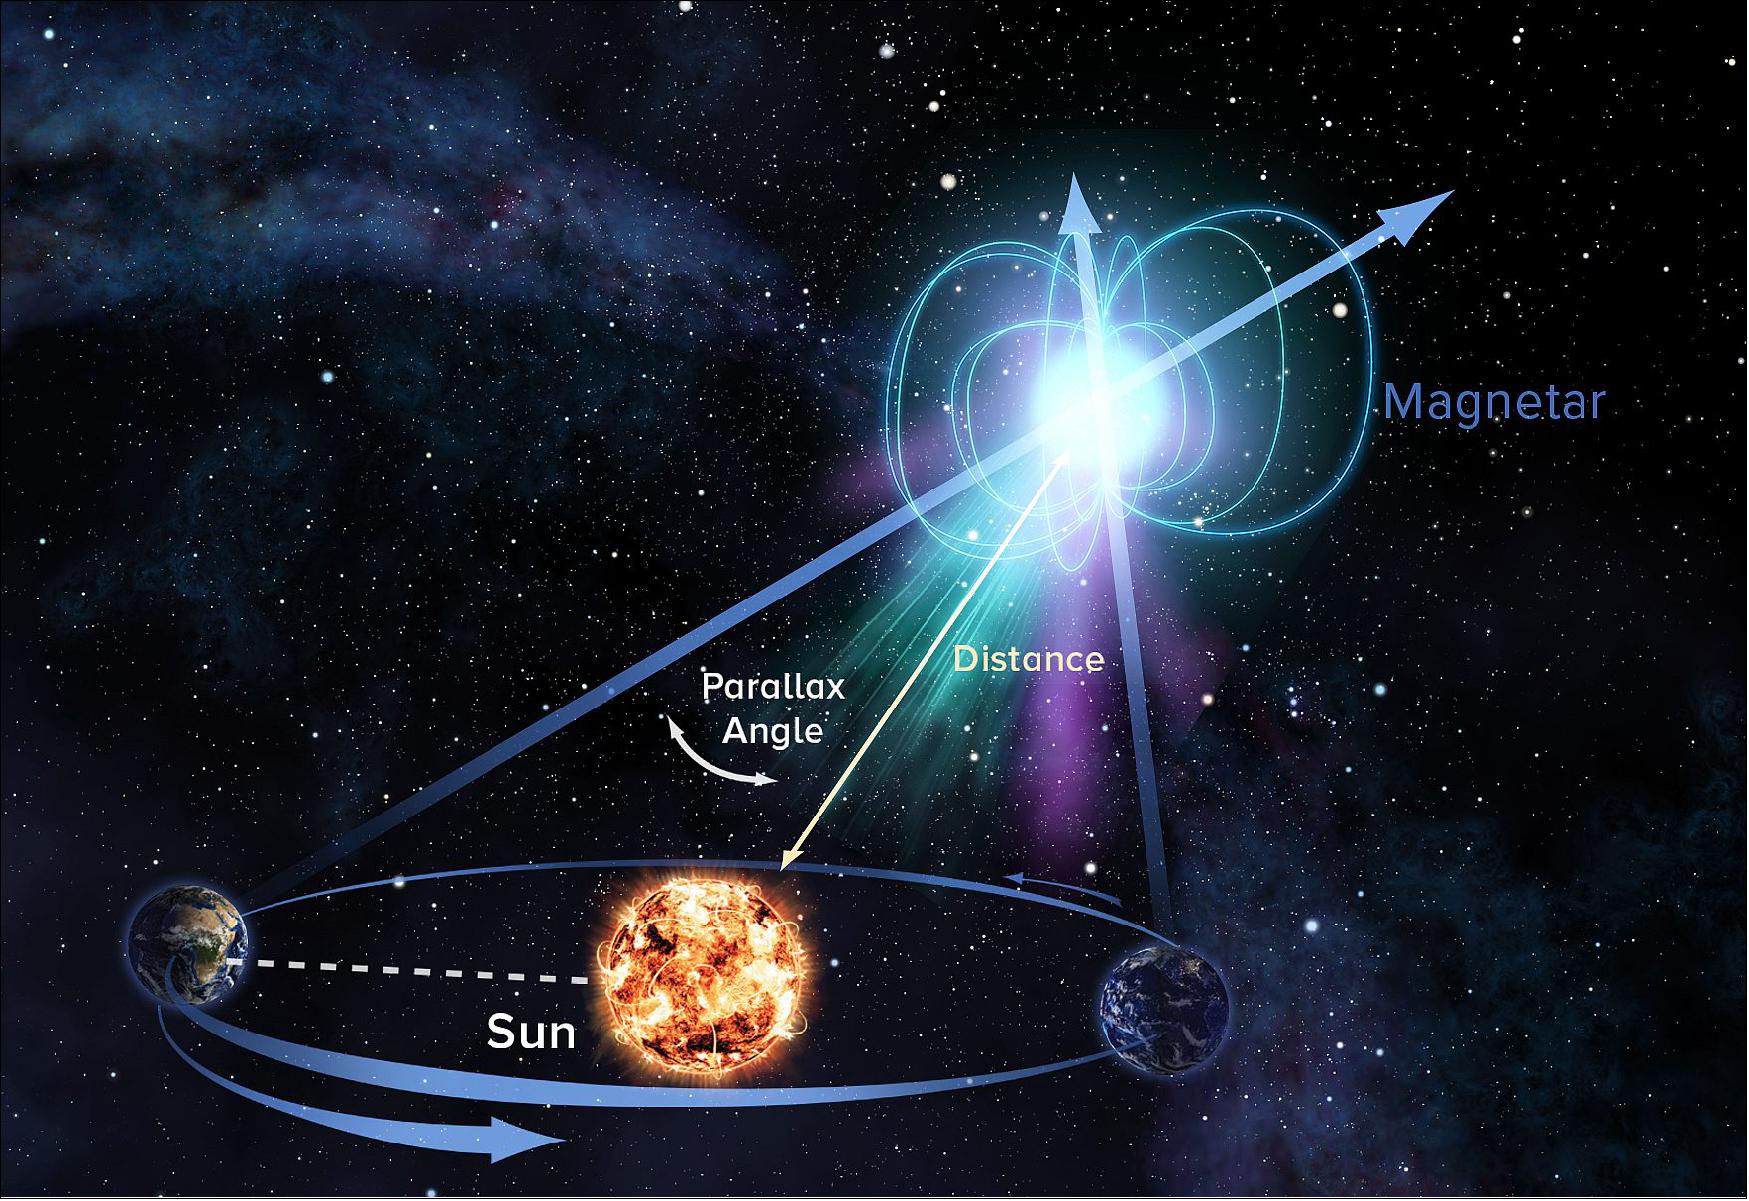 Figure 45: By observing an object from opposite sides of the Earth's orbit around the Sun, as illustrated in this artist's conception, astronomers were able to detect the slight shift in the object's apparent position with respect to much more distant background objects. This effect, called parallax, allows scientists then to use geometry to directly calculate the distance to the object — in this case a magnetar within our own Milky Way galaxy. The illustration is not to scale (image credit: Sophia Dagnello, NRAO/AUI/NSF)